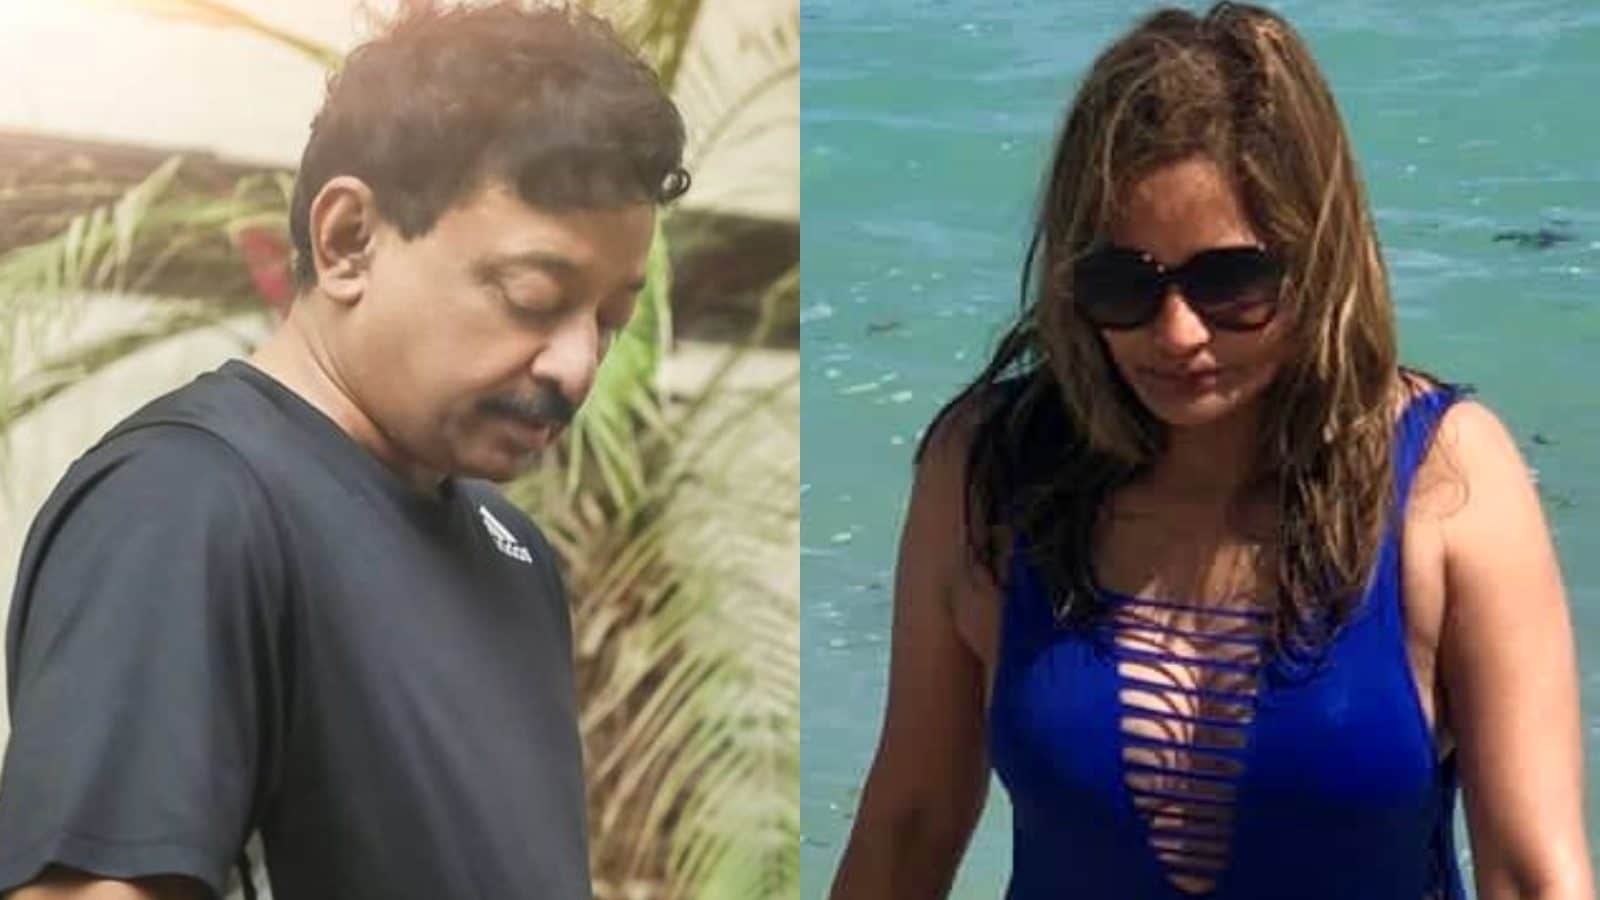 Ram Gopal Varma Shares Photos of His First Love, the Woman Who Inspired Rangeela and Title of Satya